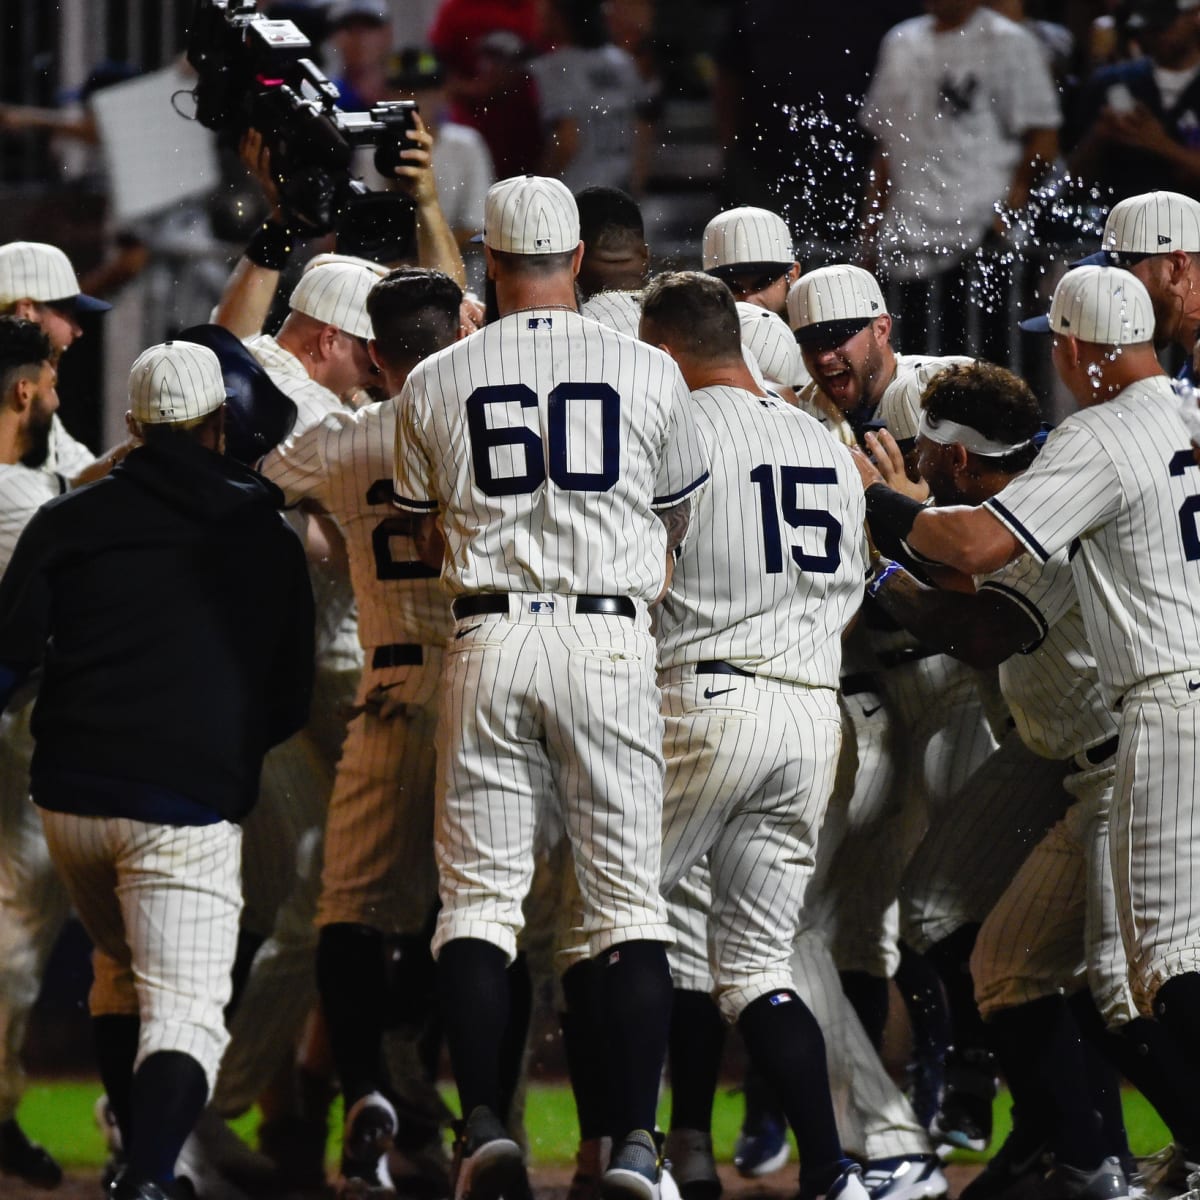 Even 'Field of Dreams' can't stop another Yankees' gut-punch loss